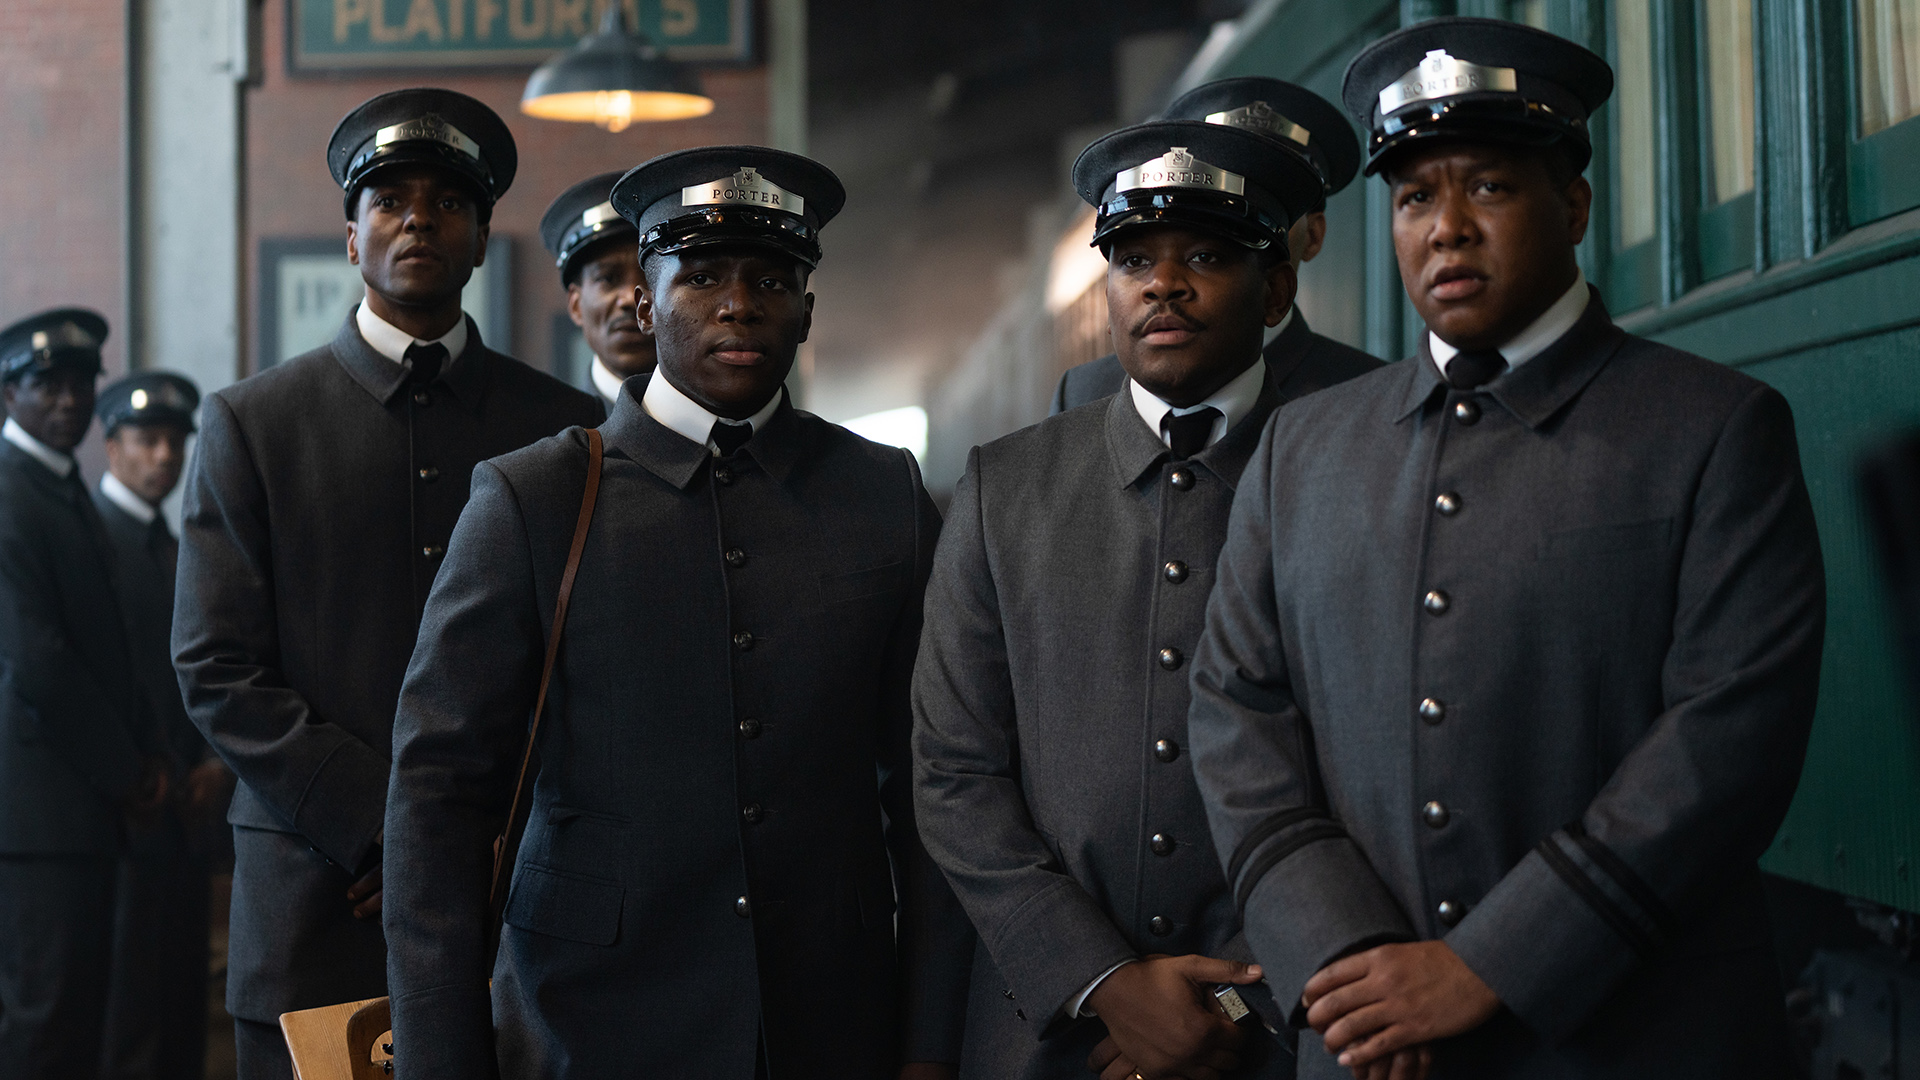 A group of Black men wearing dark gray uniforms and black caps stare at the camera with serious expressions.